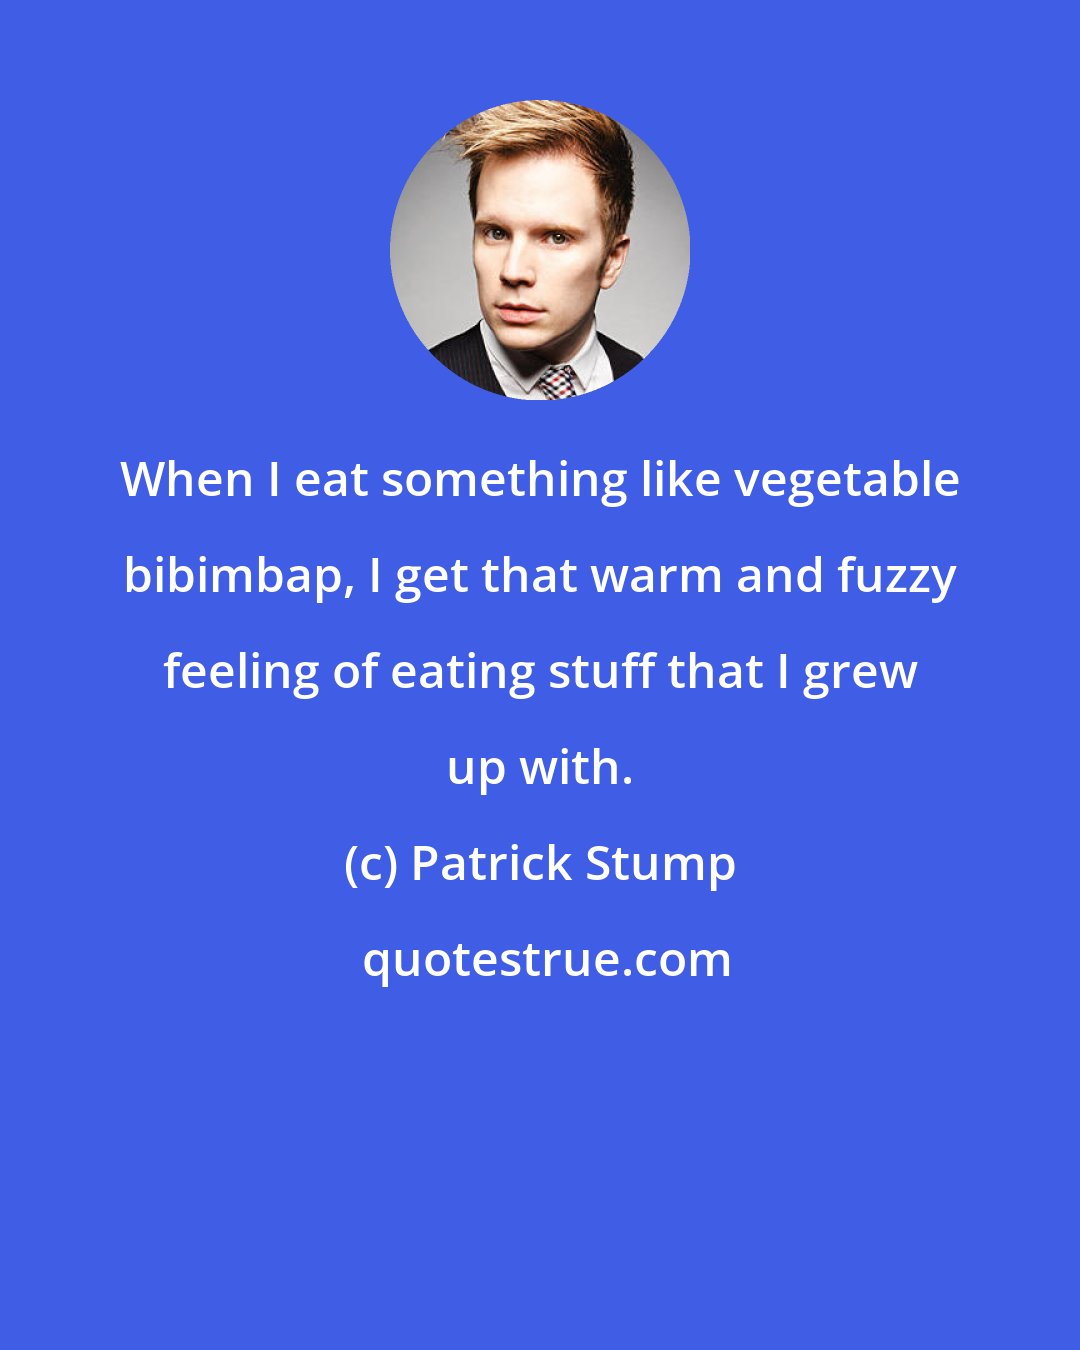 Patrick Stump: When I eat something like vegetable bibimbap, I get that warm and fuzzy feeling of eating stuff that I grew up with.